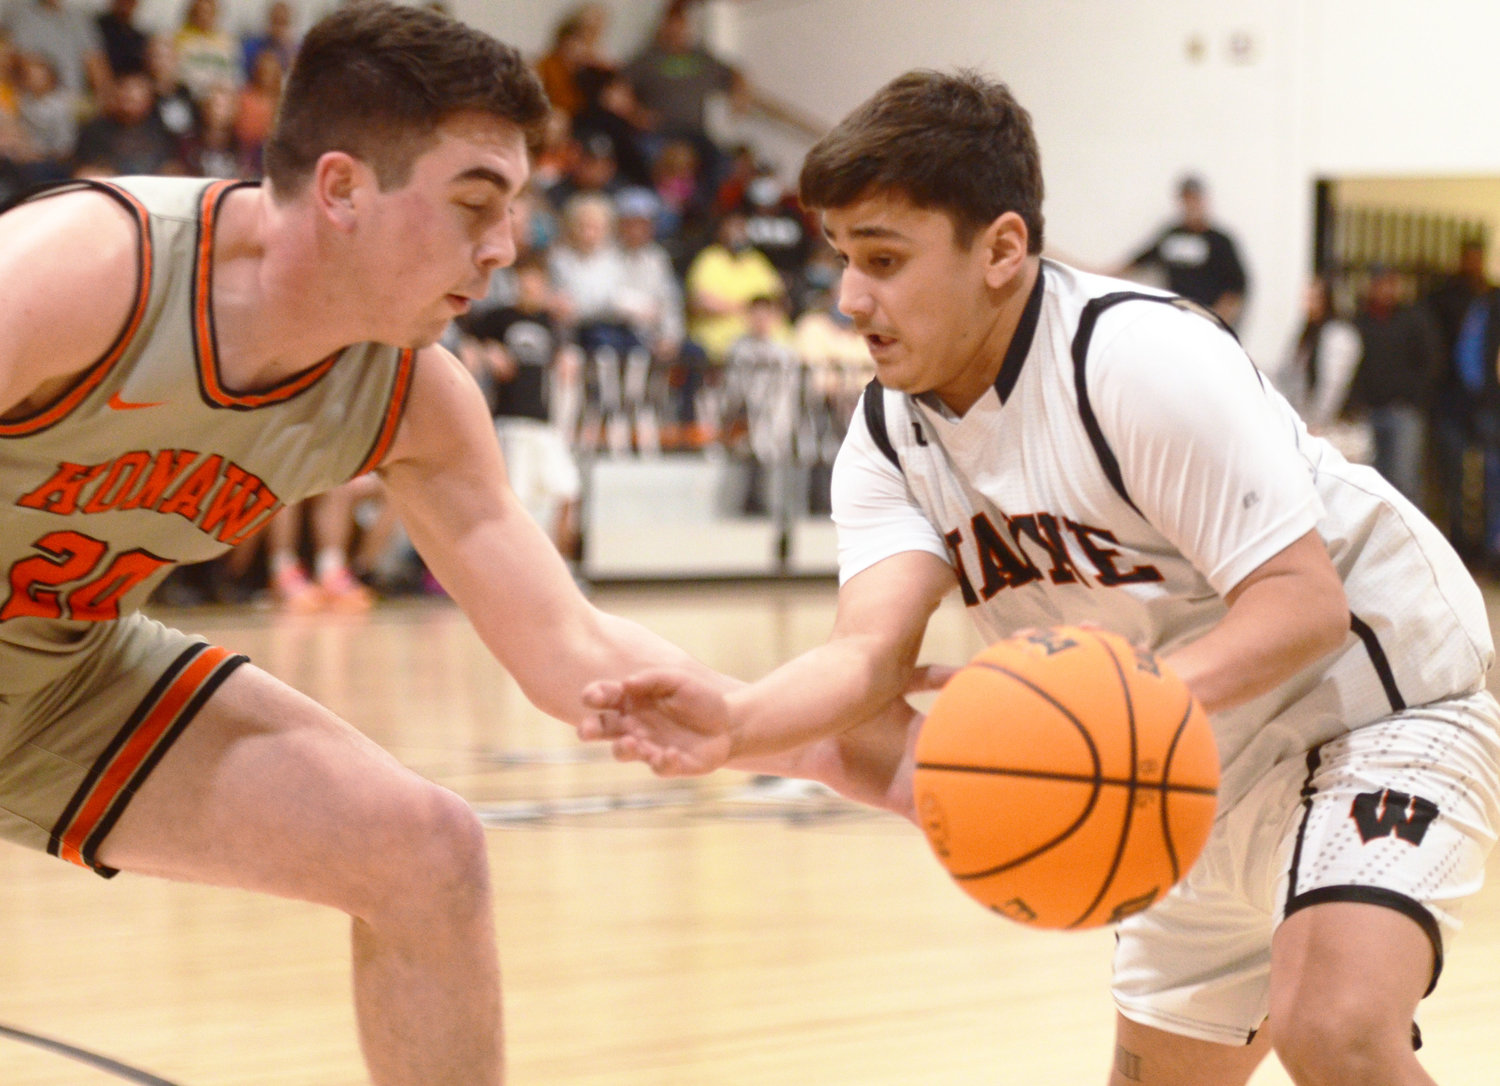 Wayne senior Jr. Perez finds an opening against the Konawa defense Friday night. Wayne defeated the Tigers 54-42. Perez scored four points in the game.